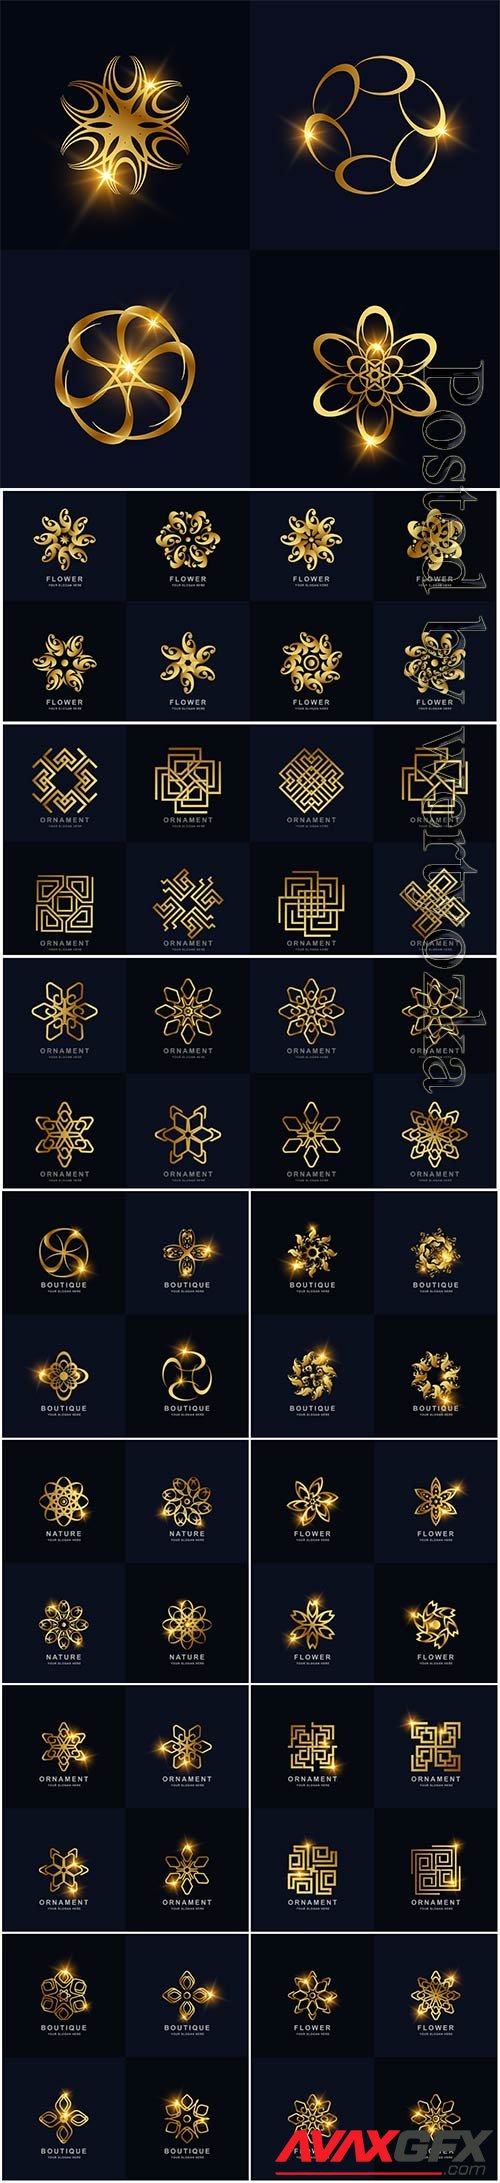 Abstract golden flower ornament logo set collection